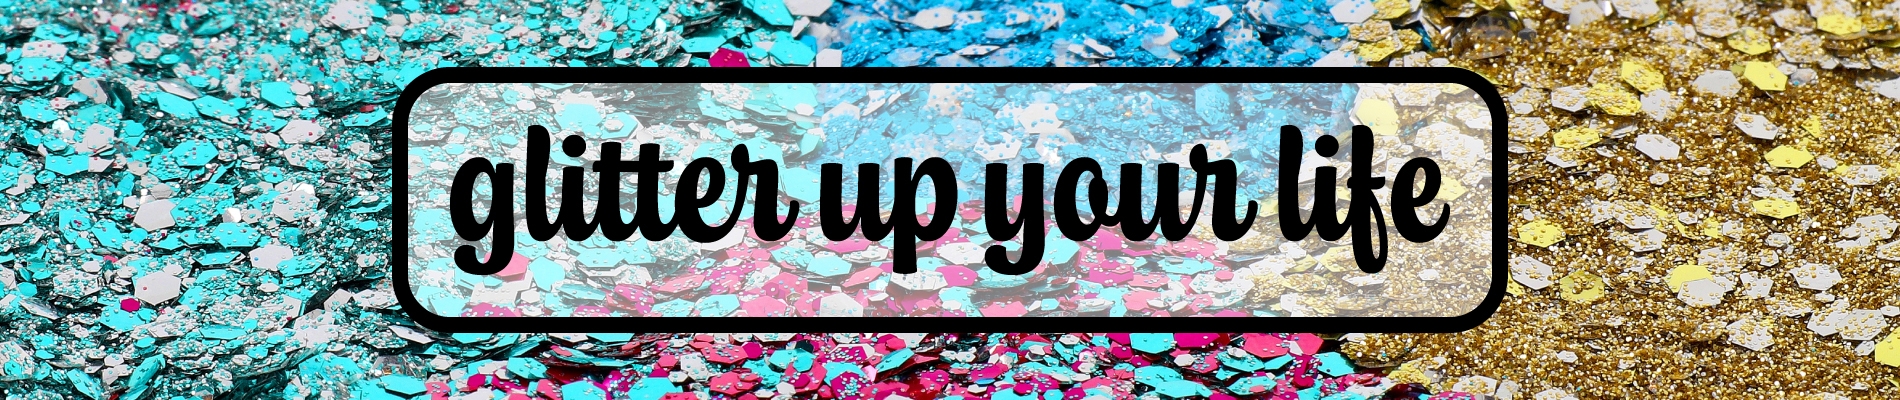 glitter up your life